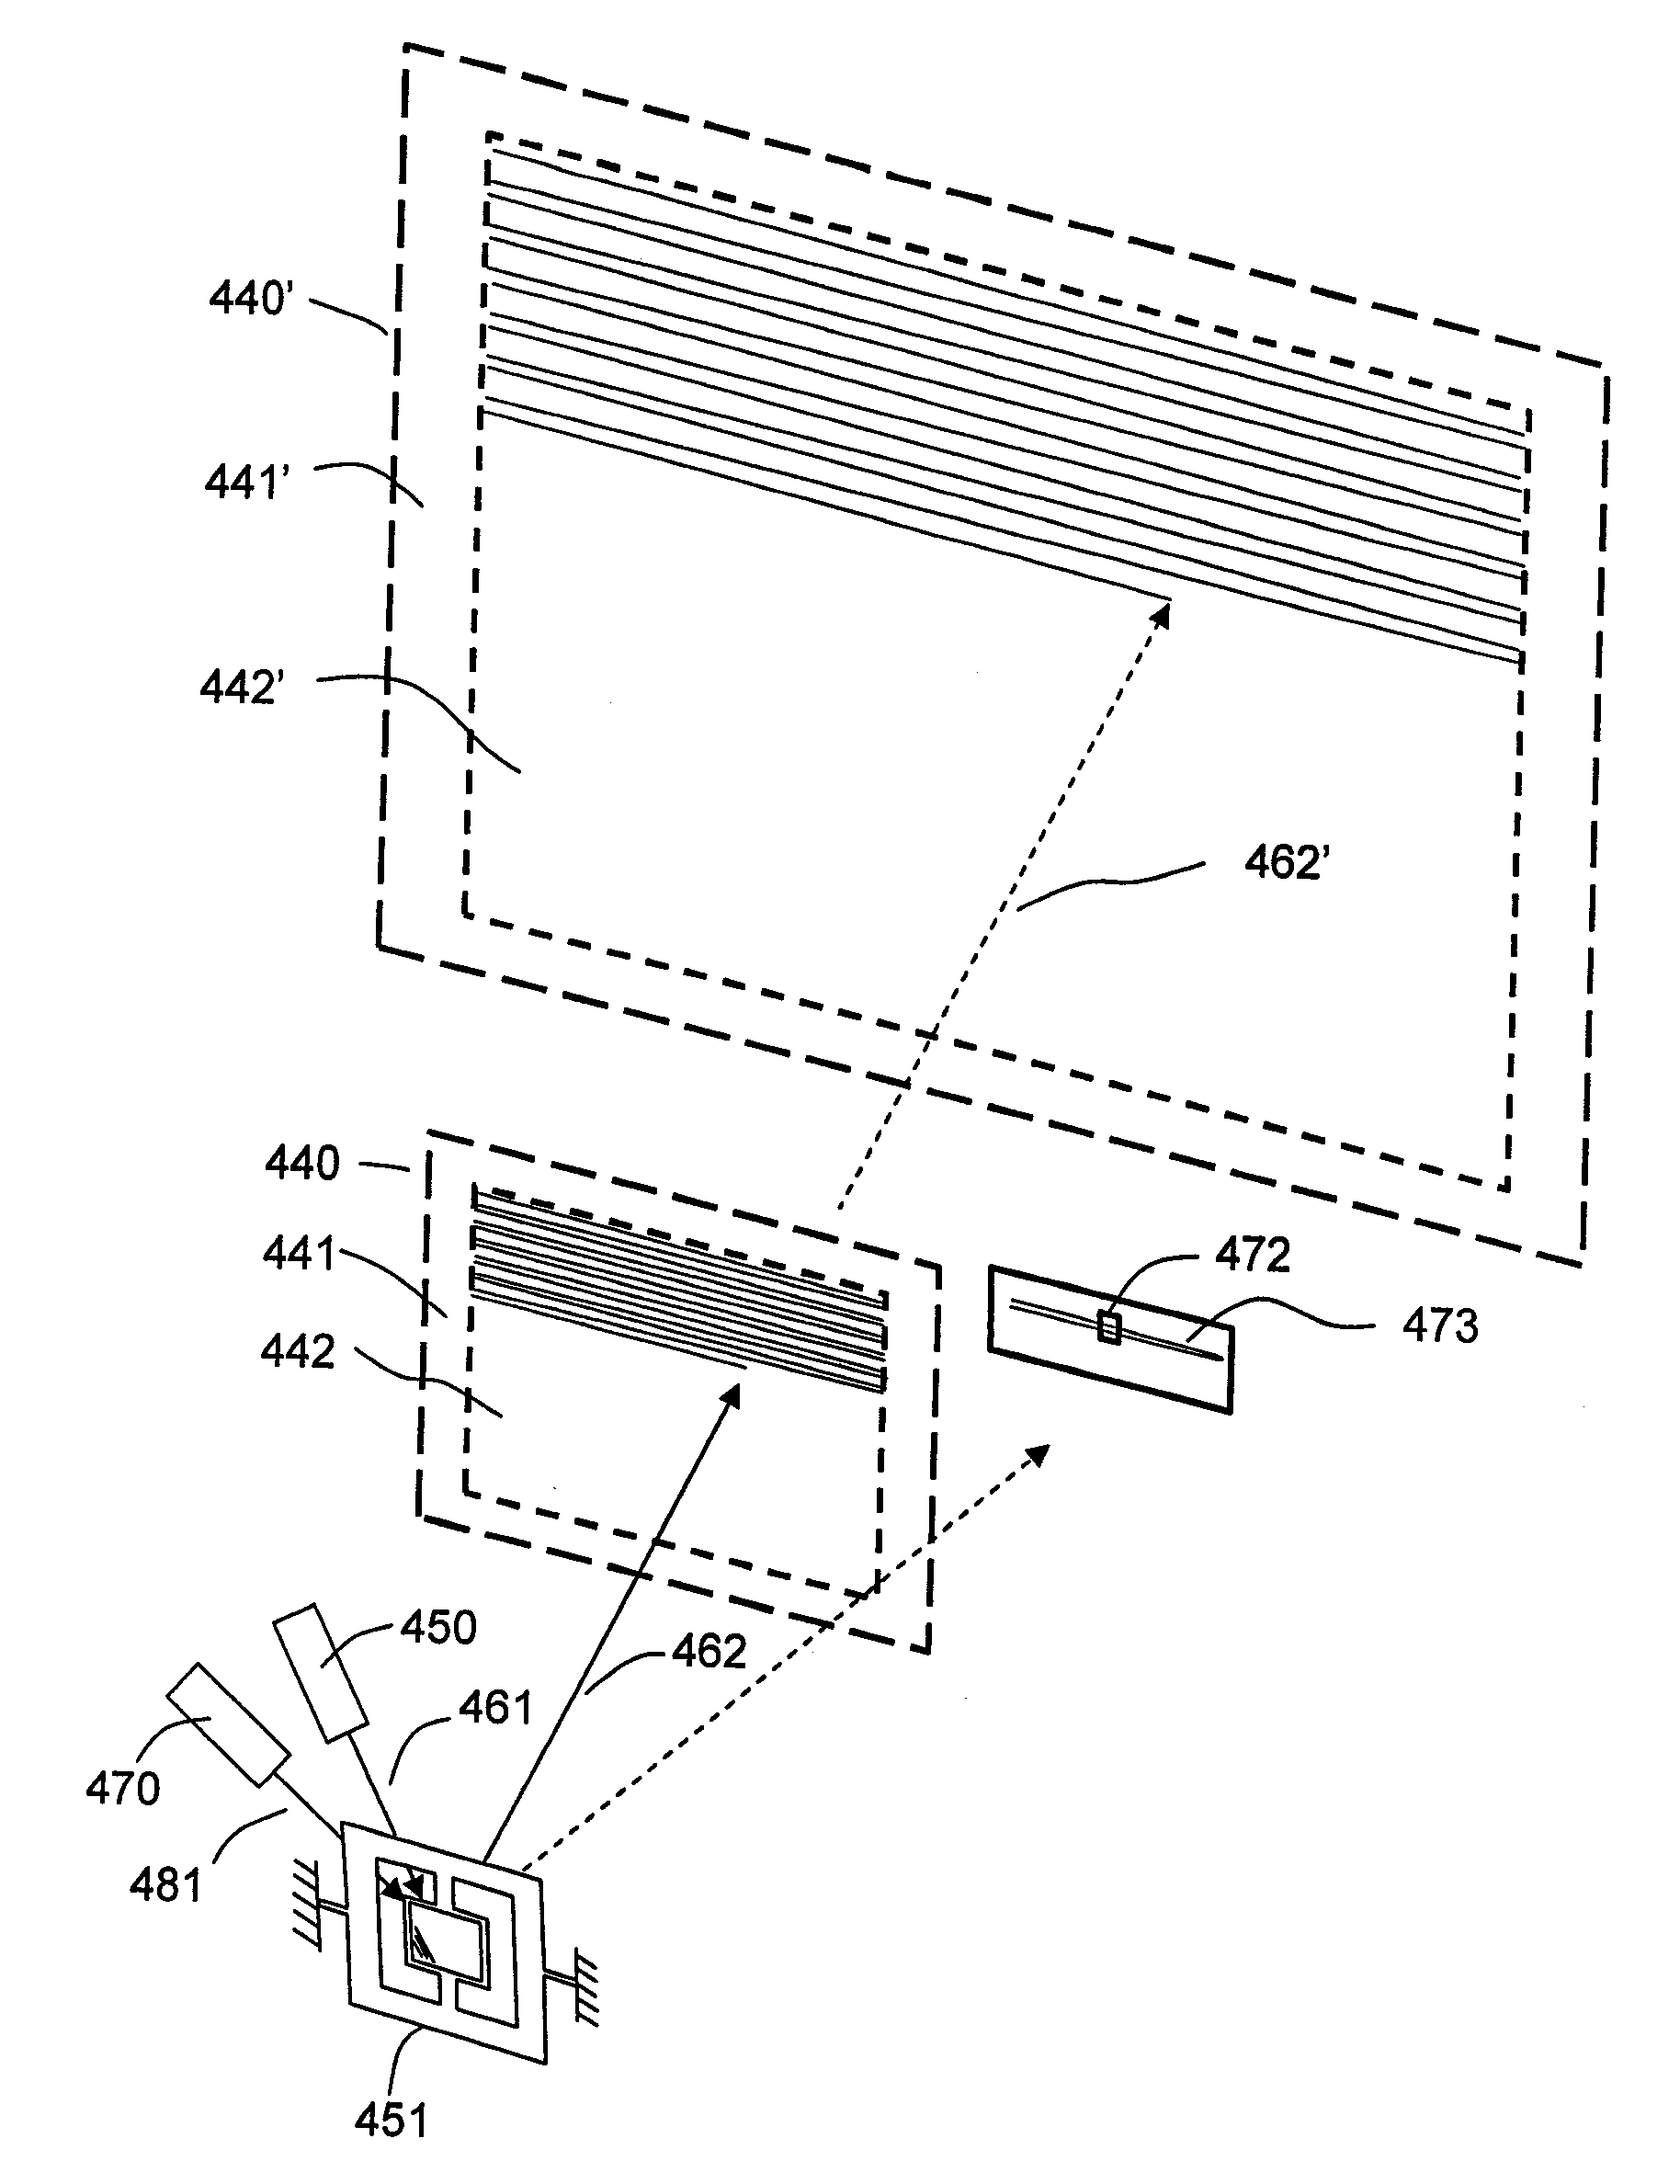 Scanning projection apparatus with phase detection and compensation